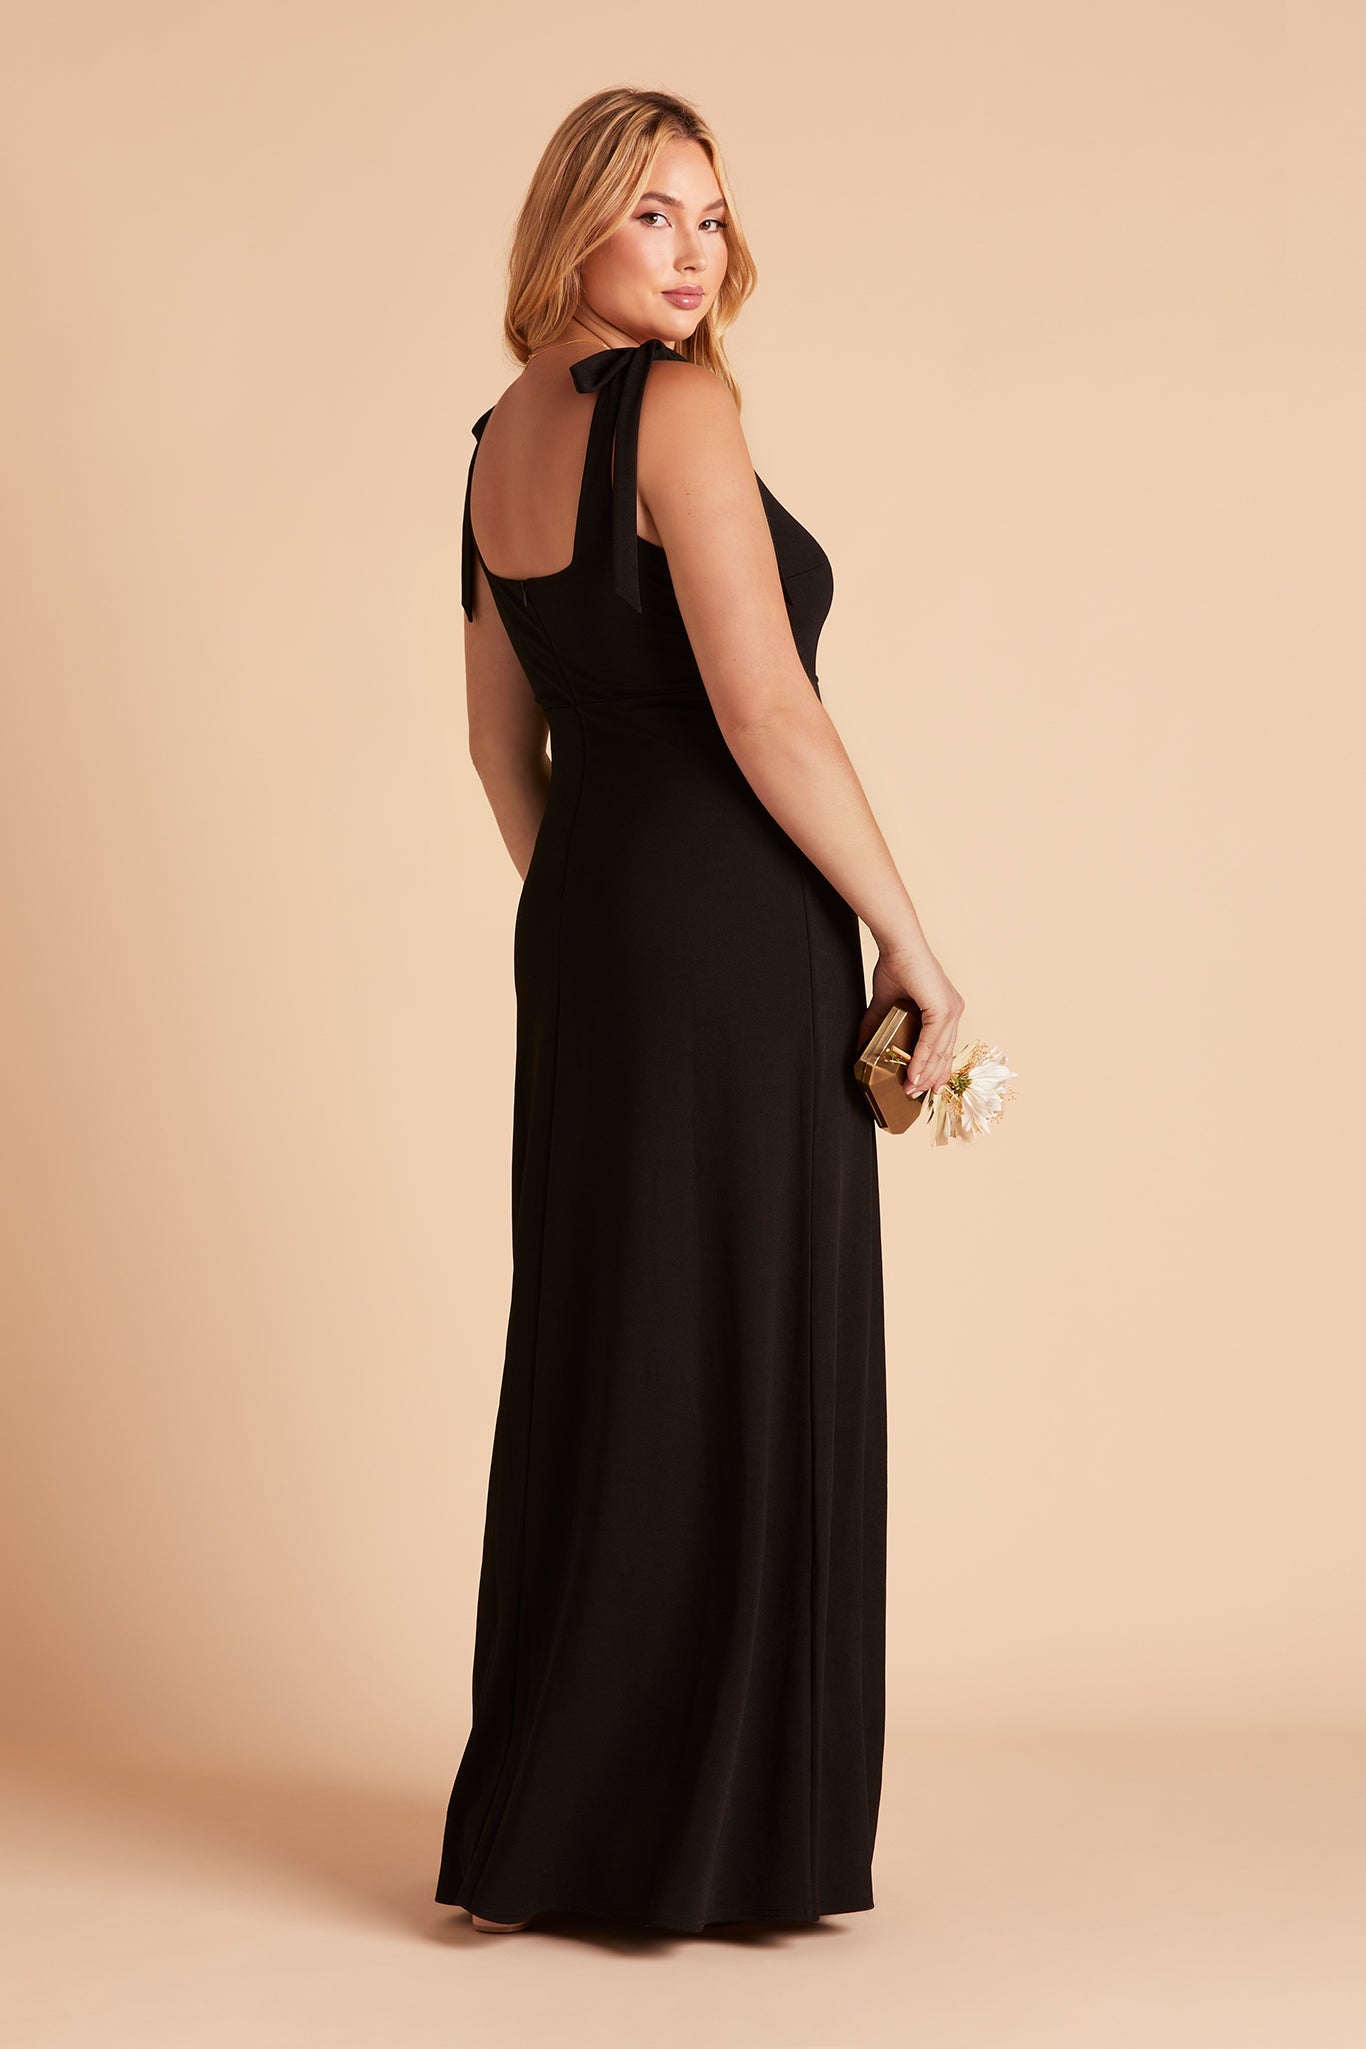 Alex convertible plus size bridesmaid dress with slit in black crepe by Birdy Grey, side view